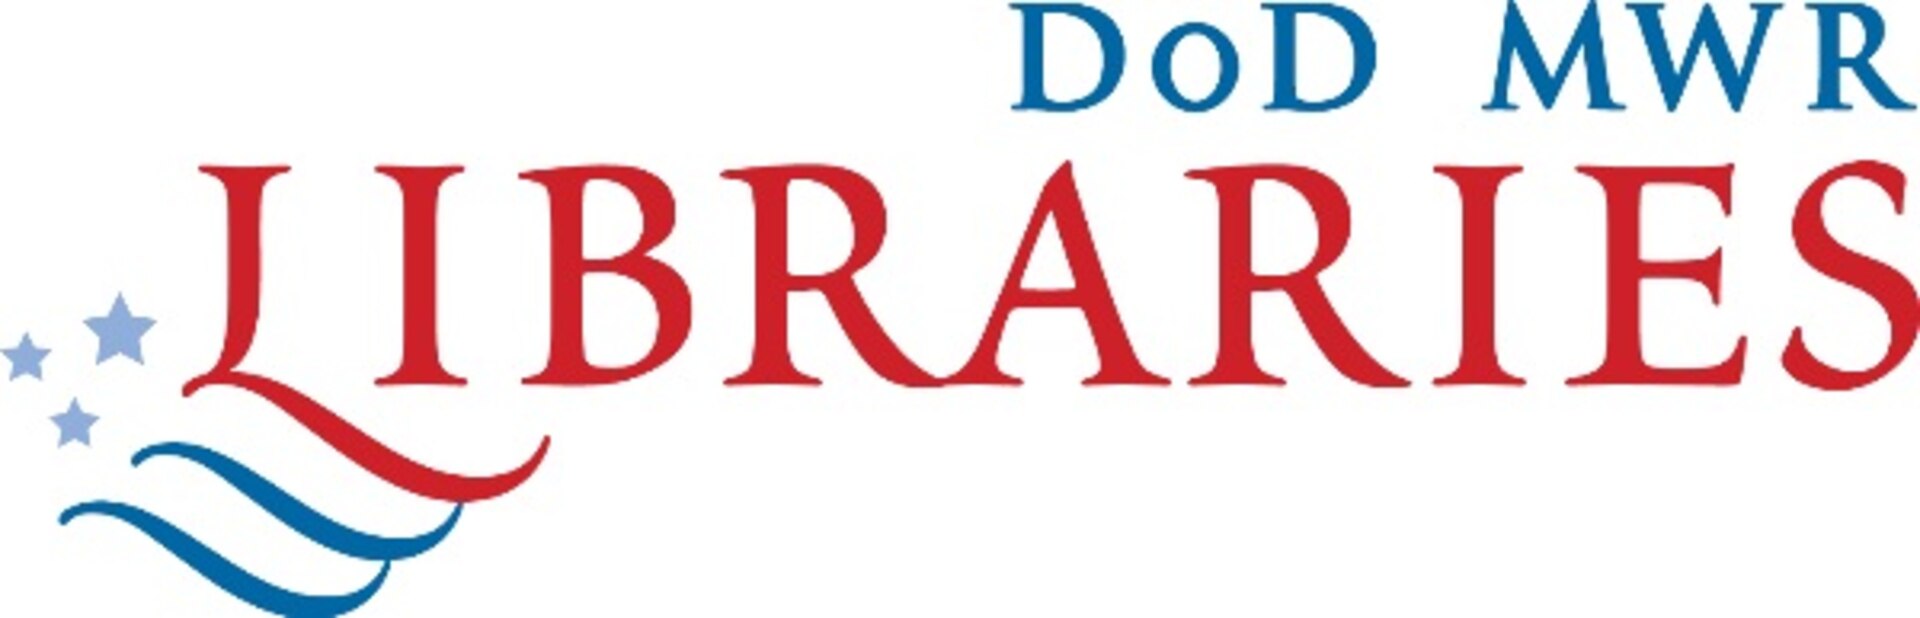 Using AAFES’ extensive online authentication system, authorized library patrons can use their Common Access Cards (CAC) to create an account at https://www.dodmwrlibraries.org/.